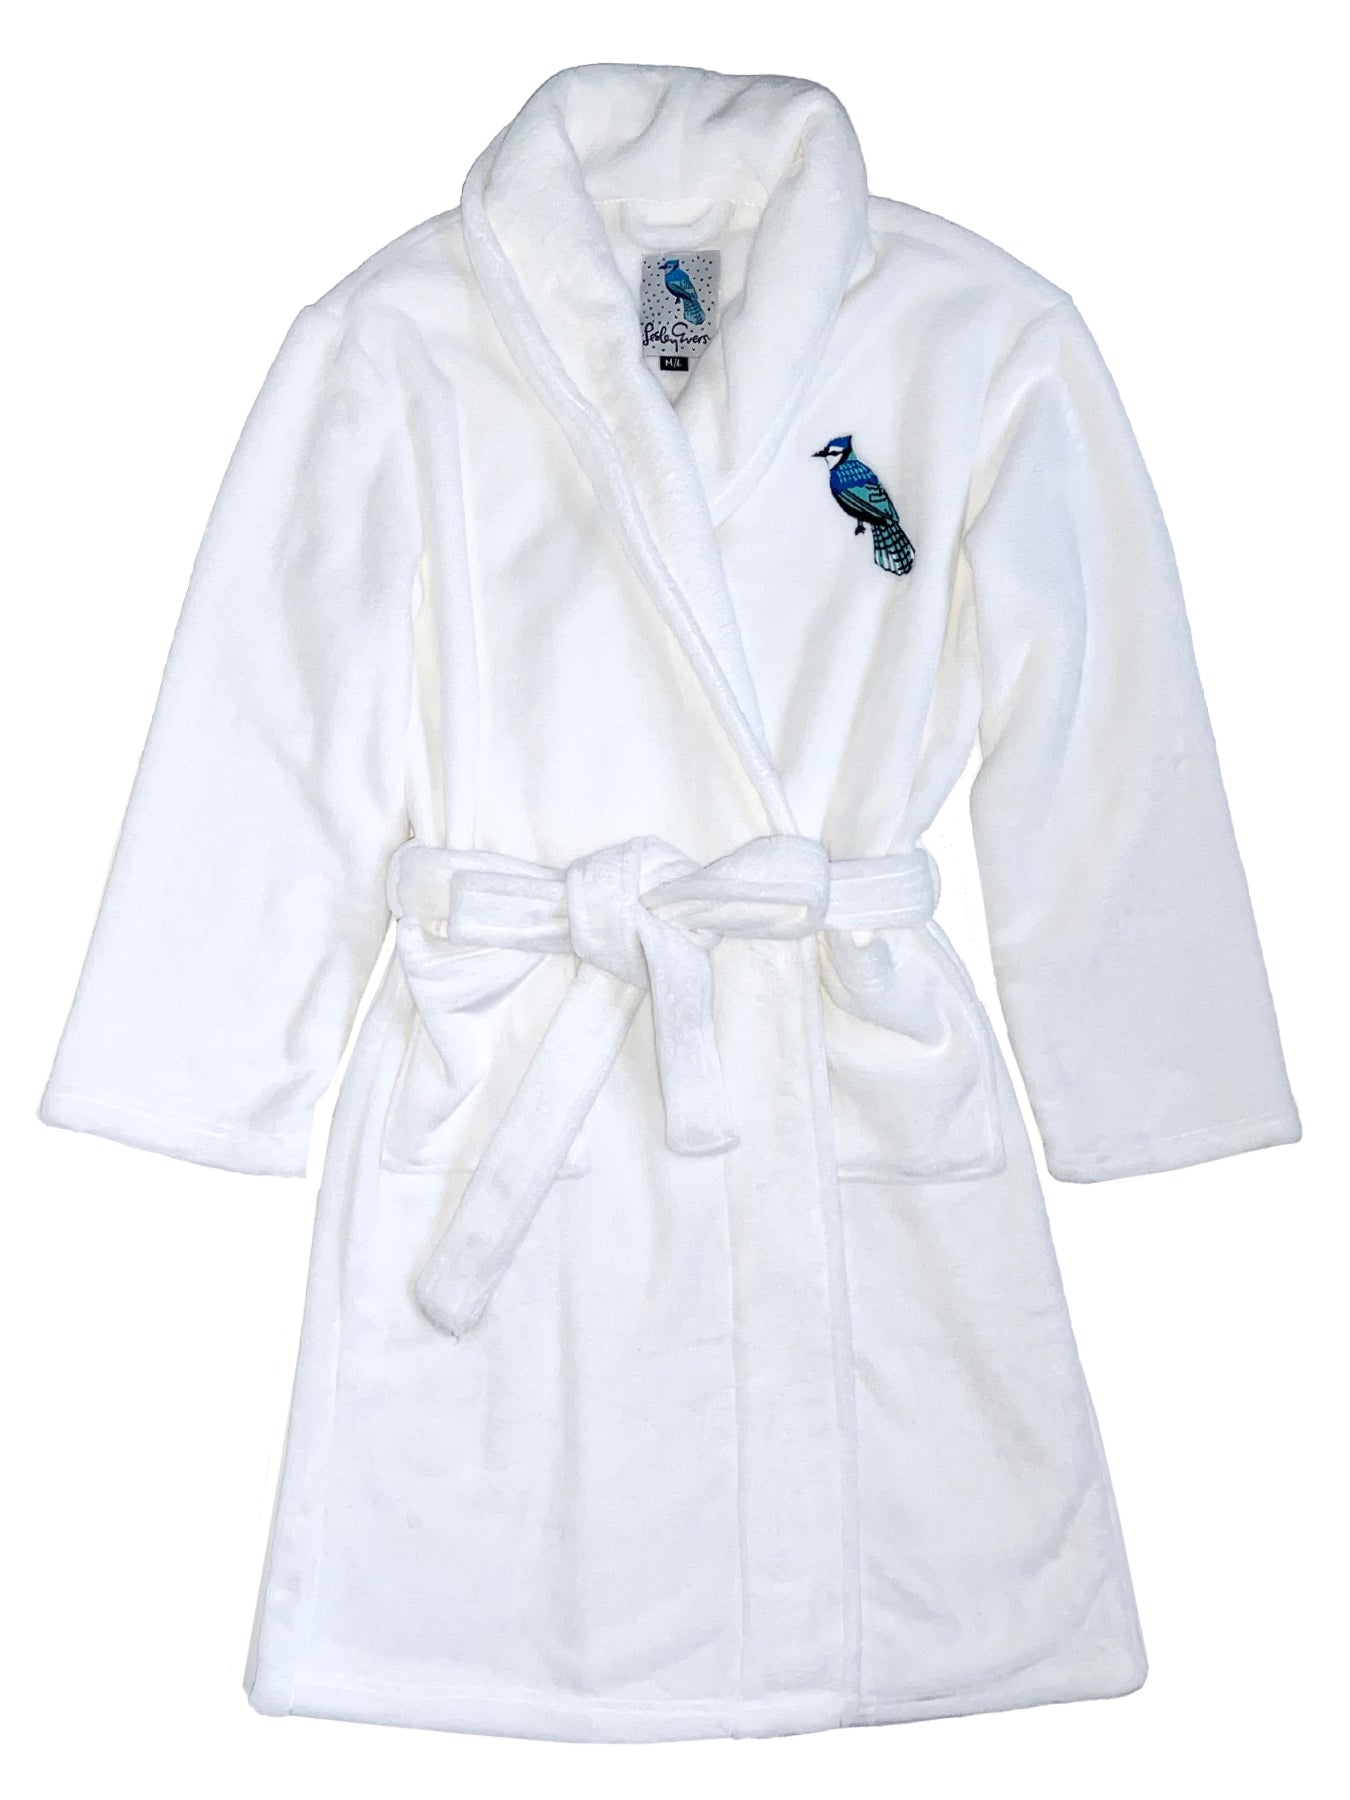 VICKY robe White - Lesley Evers-23-HG200-W3--